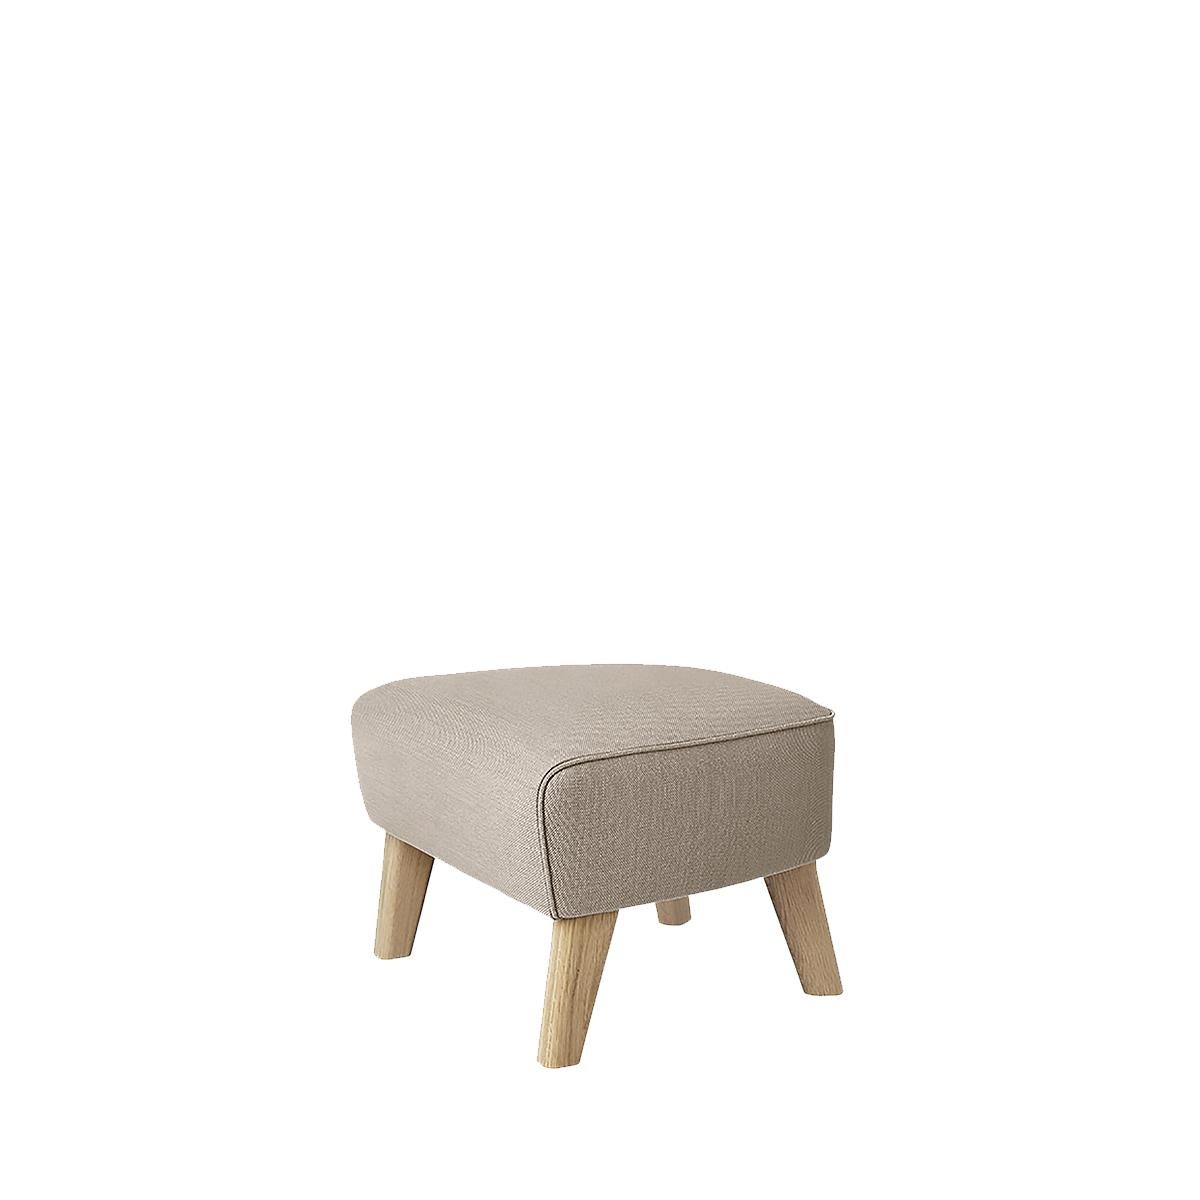 Beige and natural oak sahco zero footstool by Lassen.
Dimensions: W 56 x D 58 x H 40 cm 
Materials: Textile
Also available: Other colors available

The my own chair footstool has been designed in the same spirit as Flemming Lassen’s original